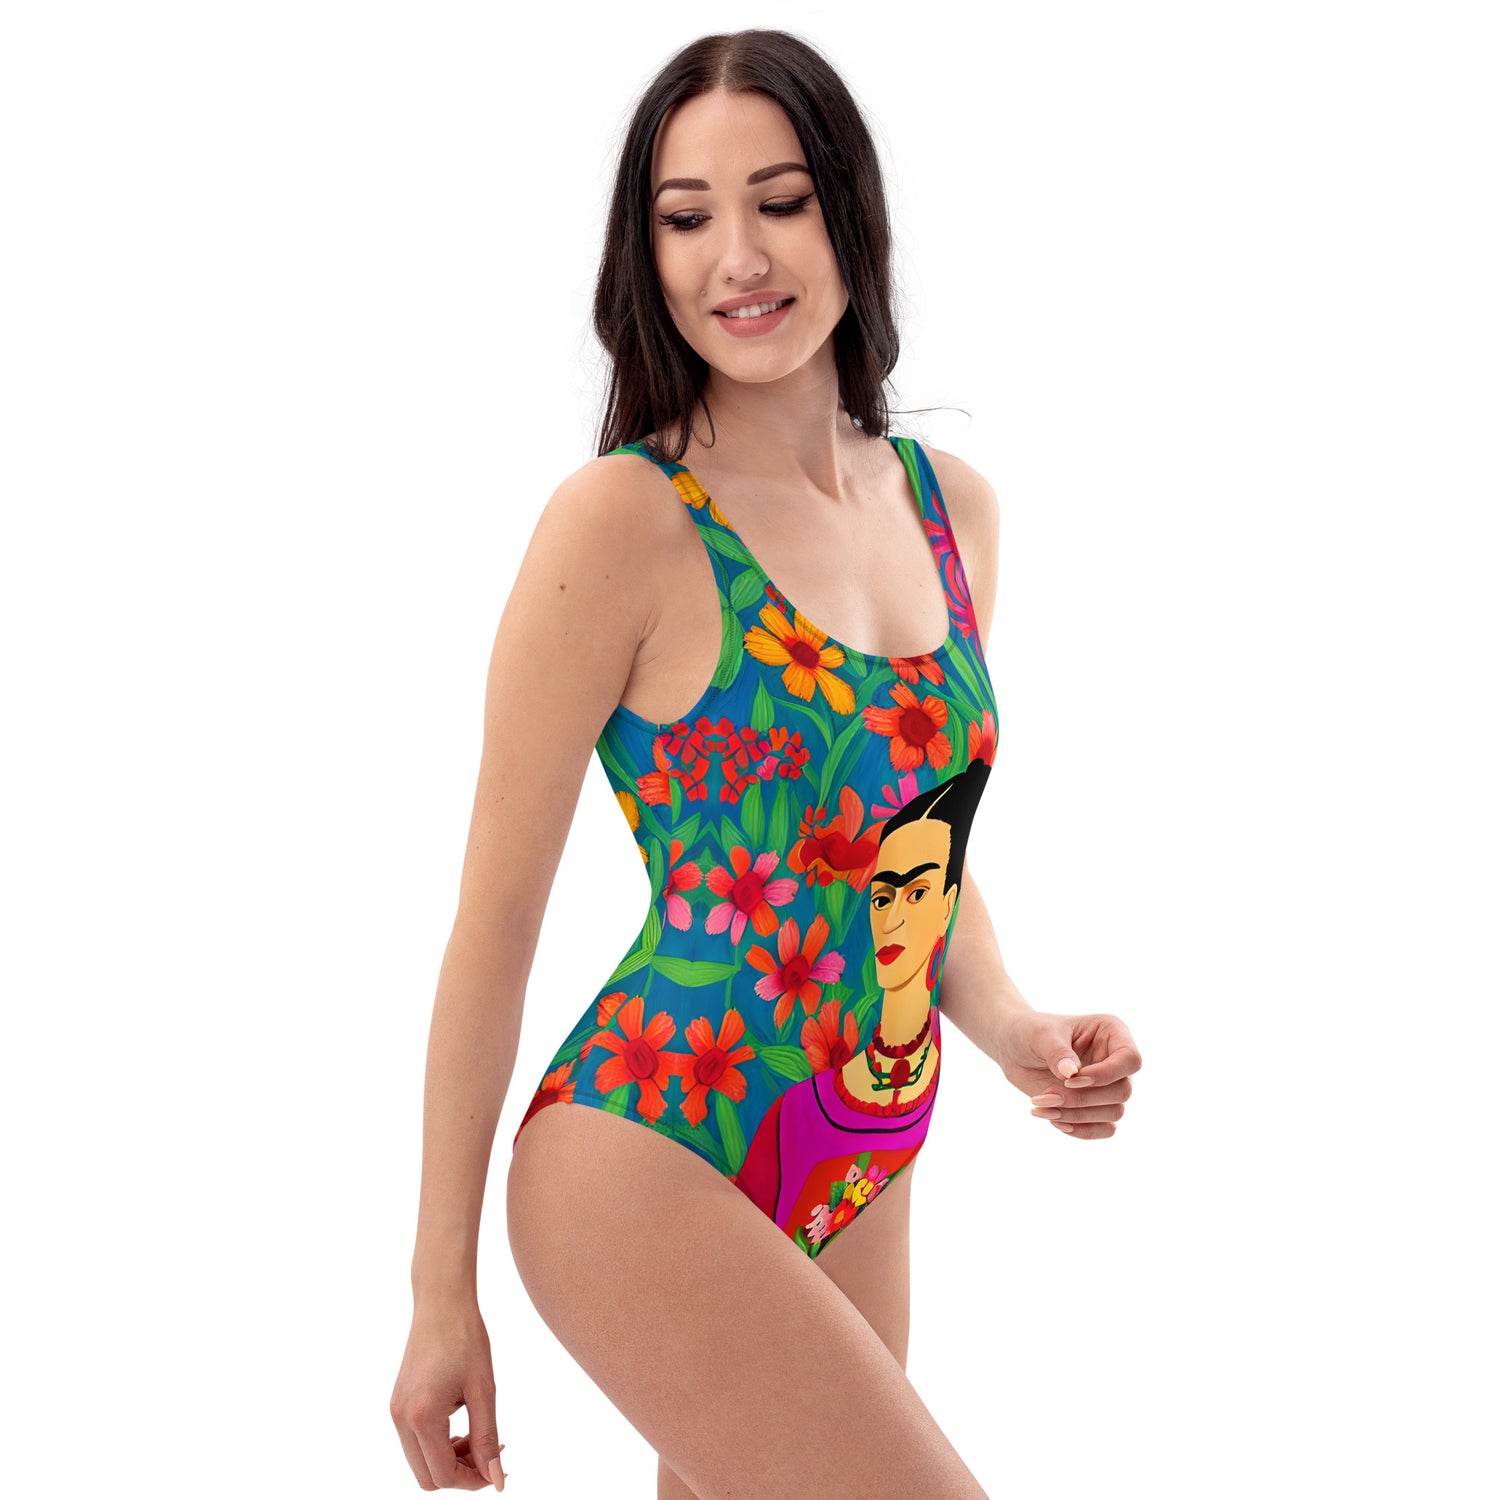 Mexican Icon Frida Khalo One-Piece Swimsuit